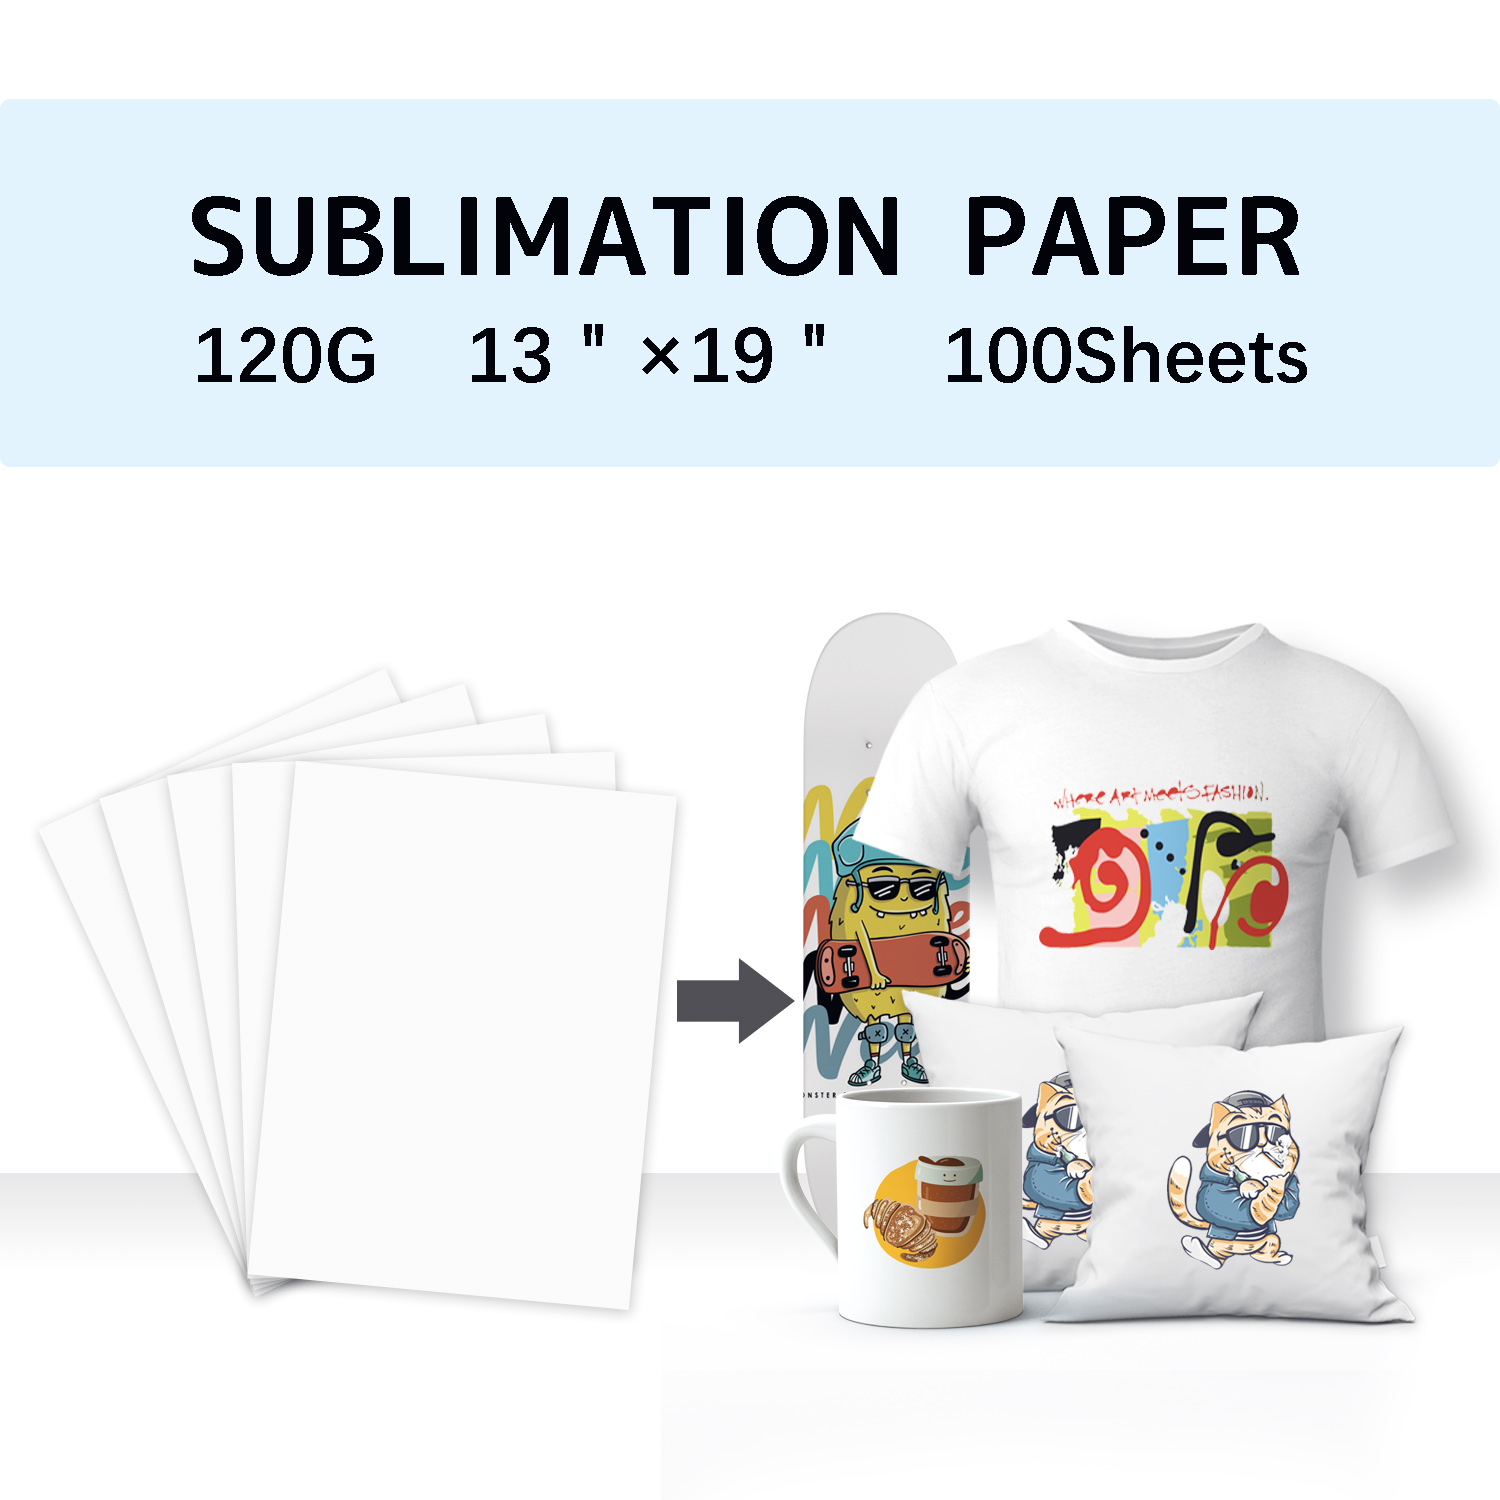 120g Sublimation Paper Heat Transfer 100 Sheets 13 x 19 Inches for Inkjet  Printer with Sublimation Ink